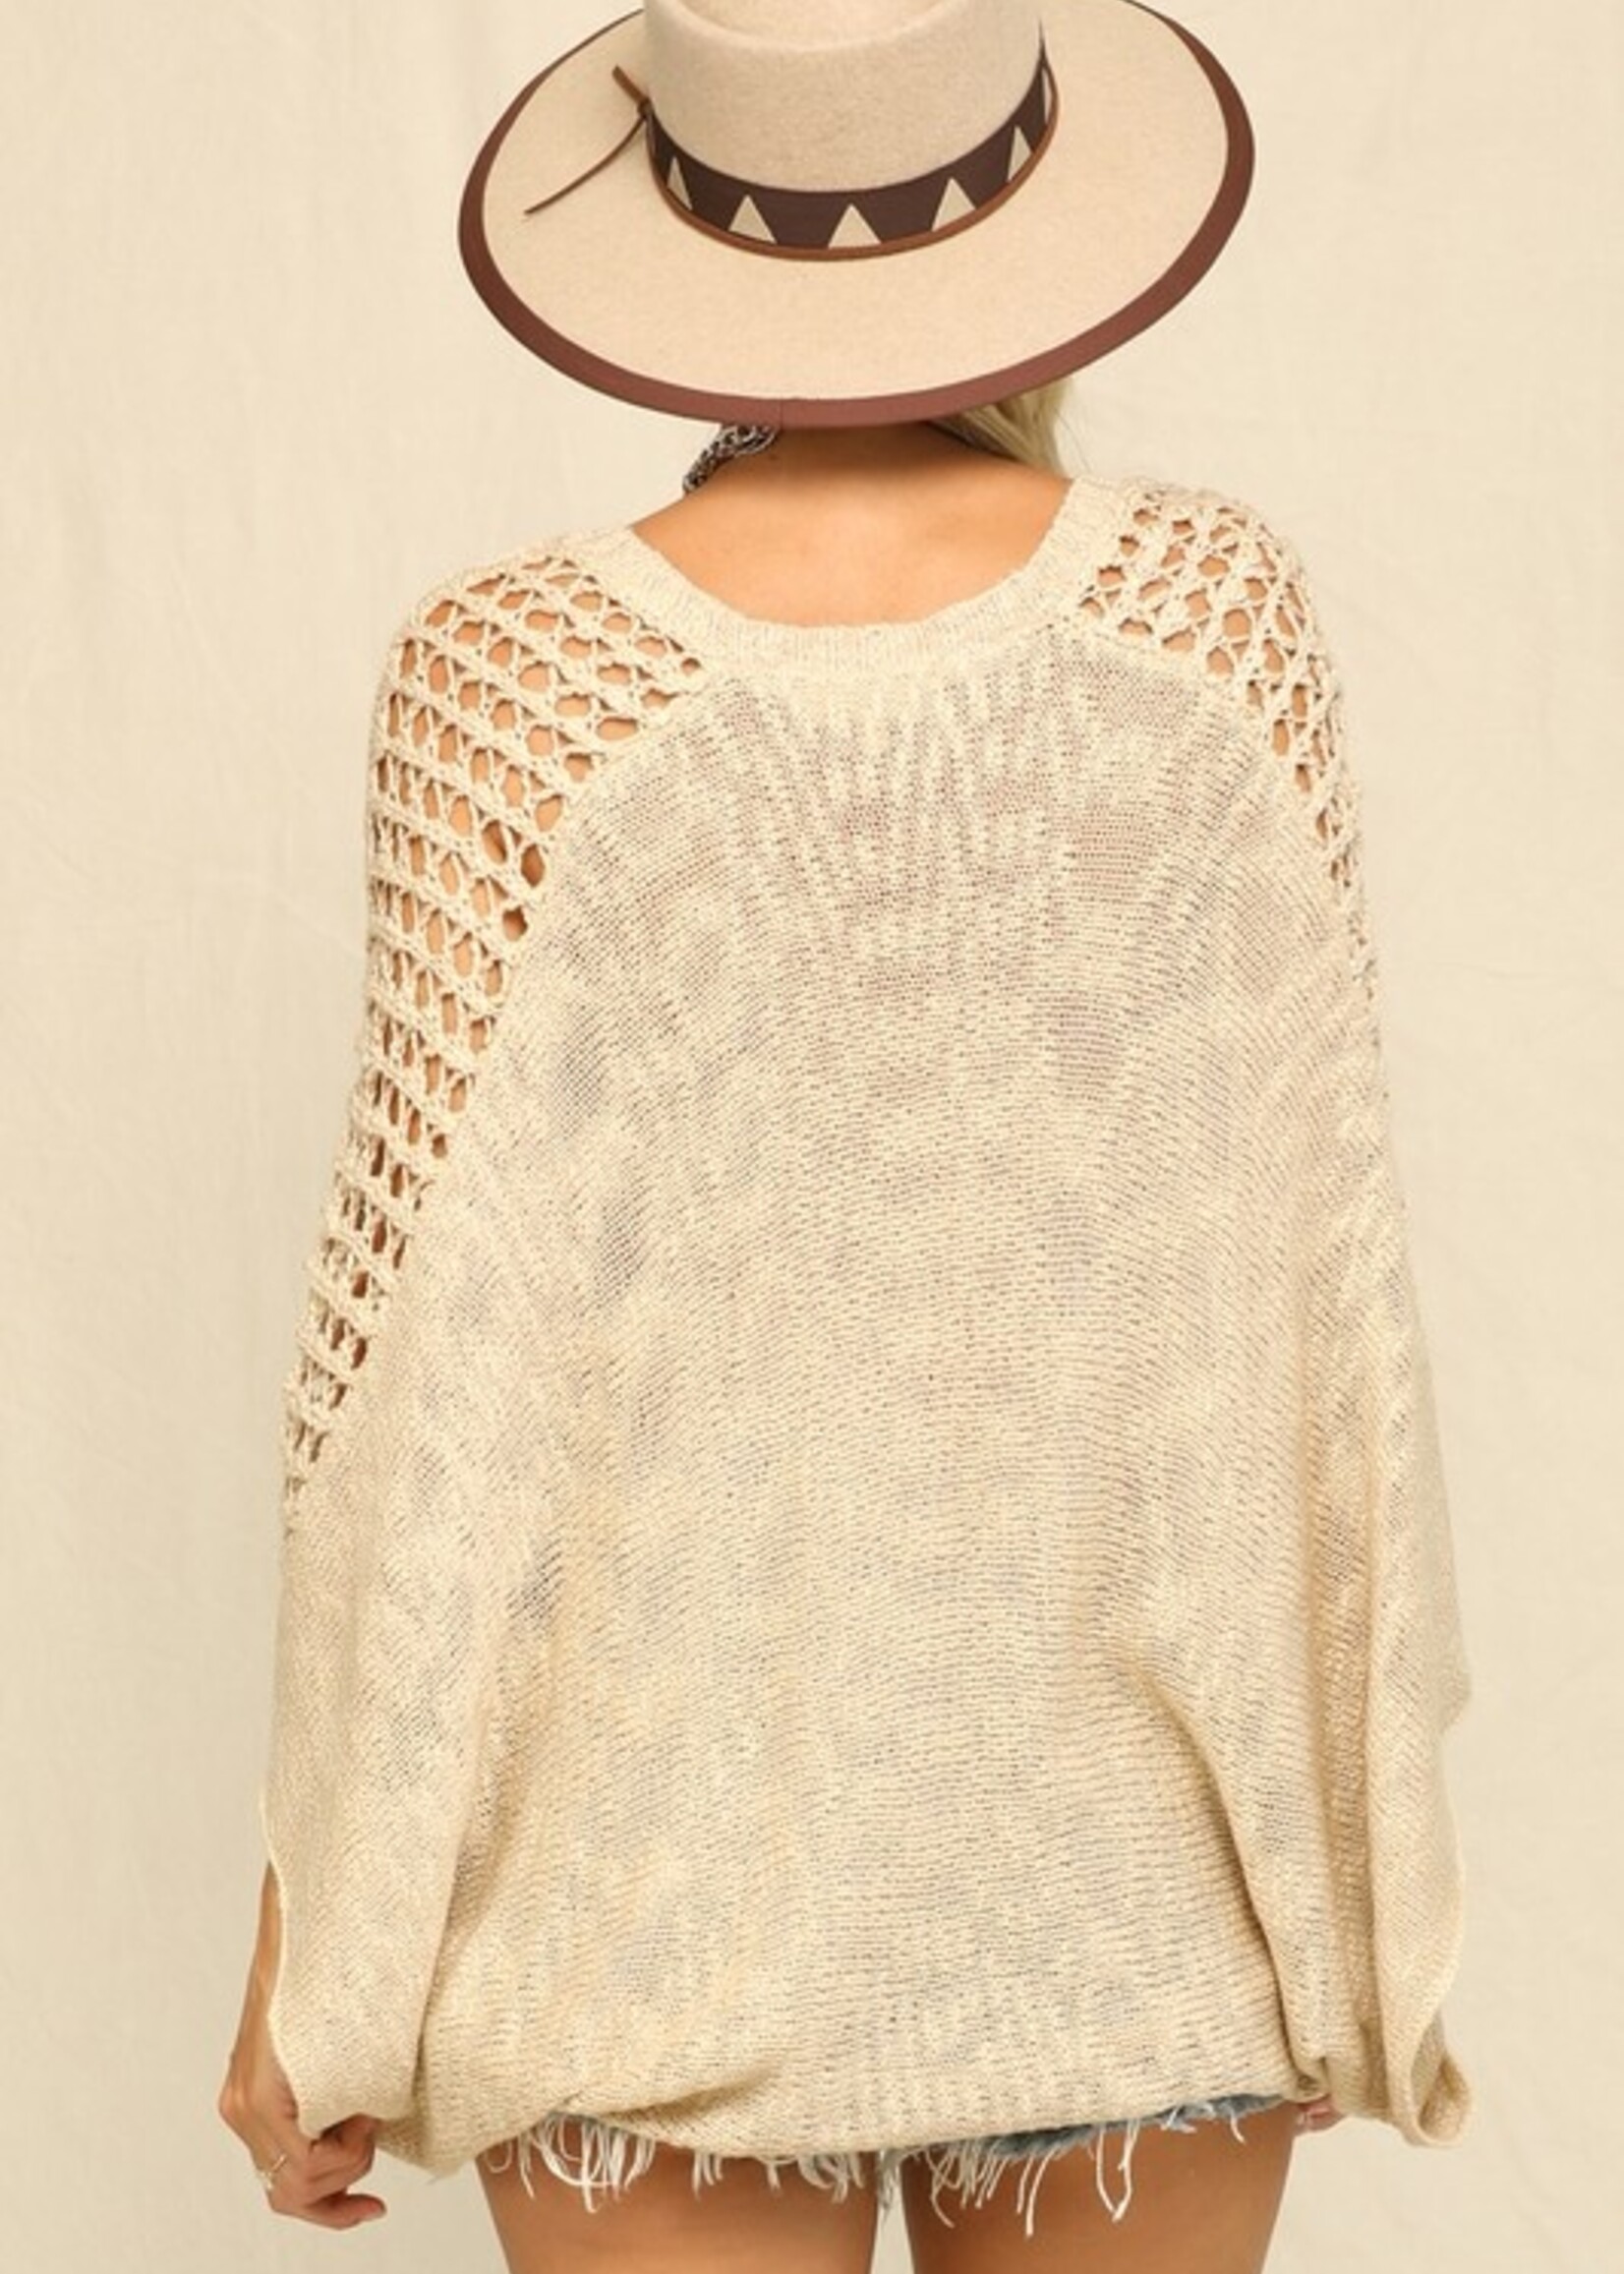 Open sleeve sweater +2 colors